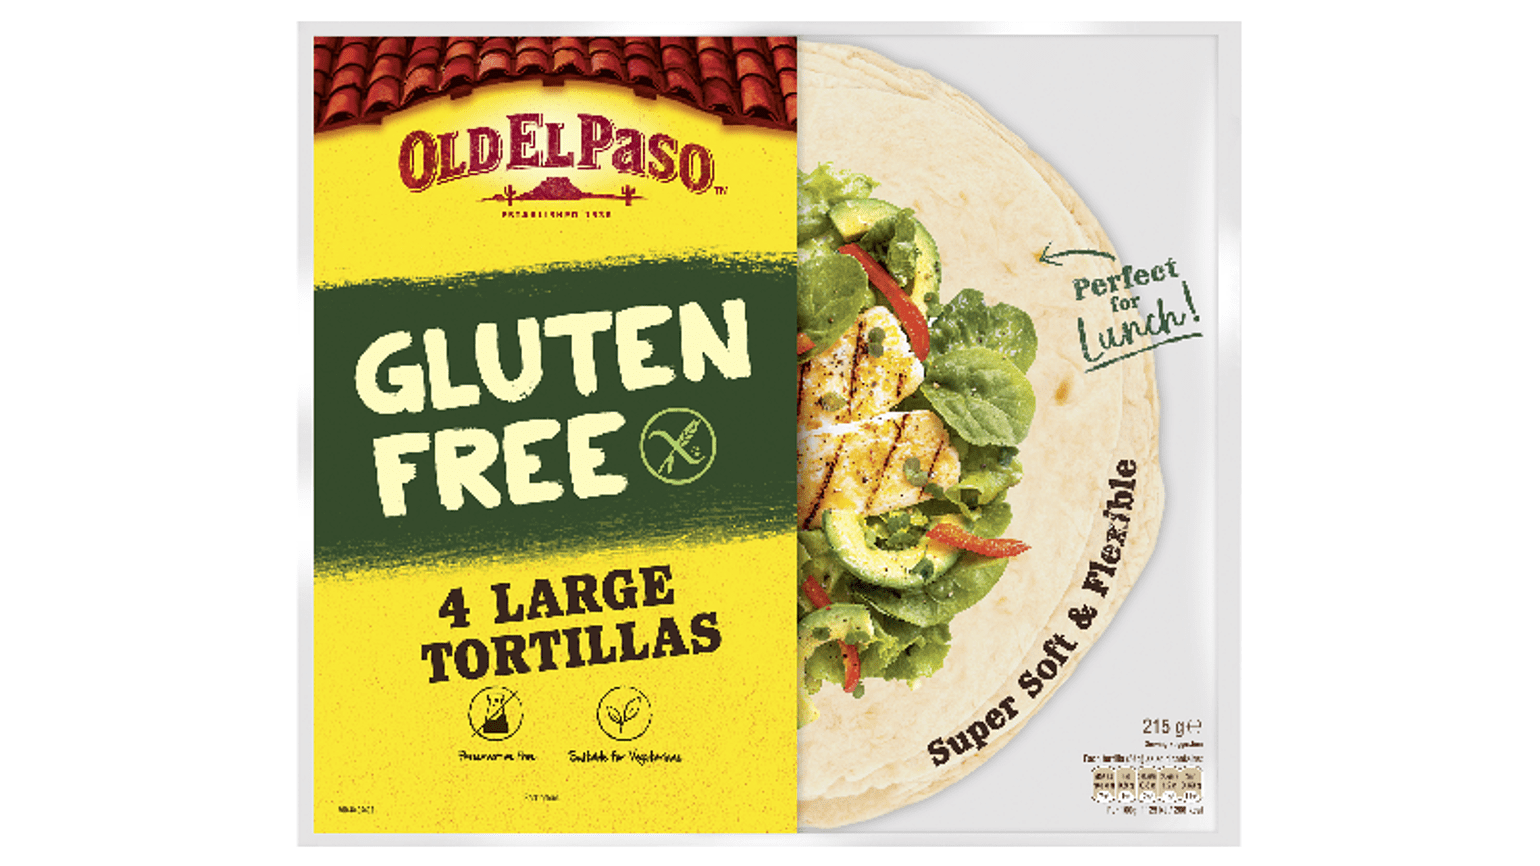 pack of Old El Paso's gluten free 4 large tortilla wraps (215g)